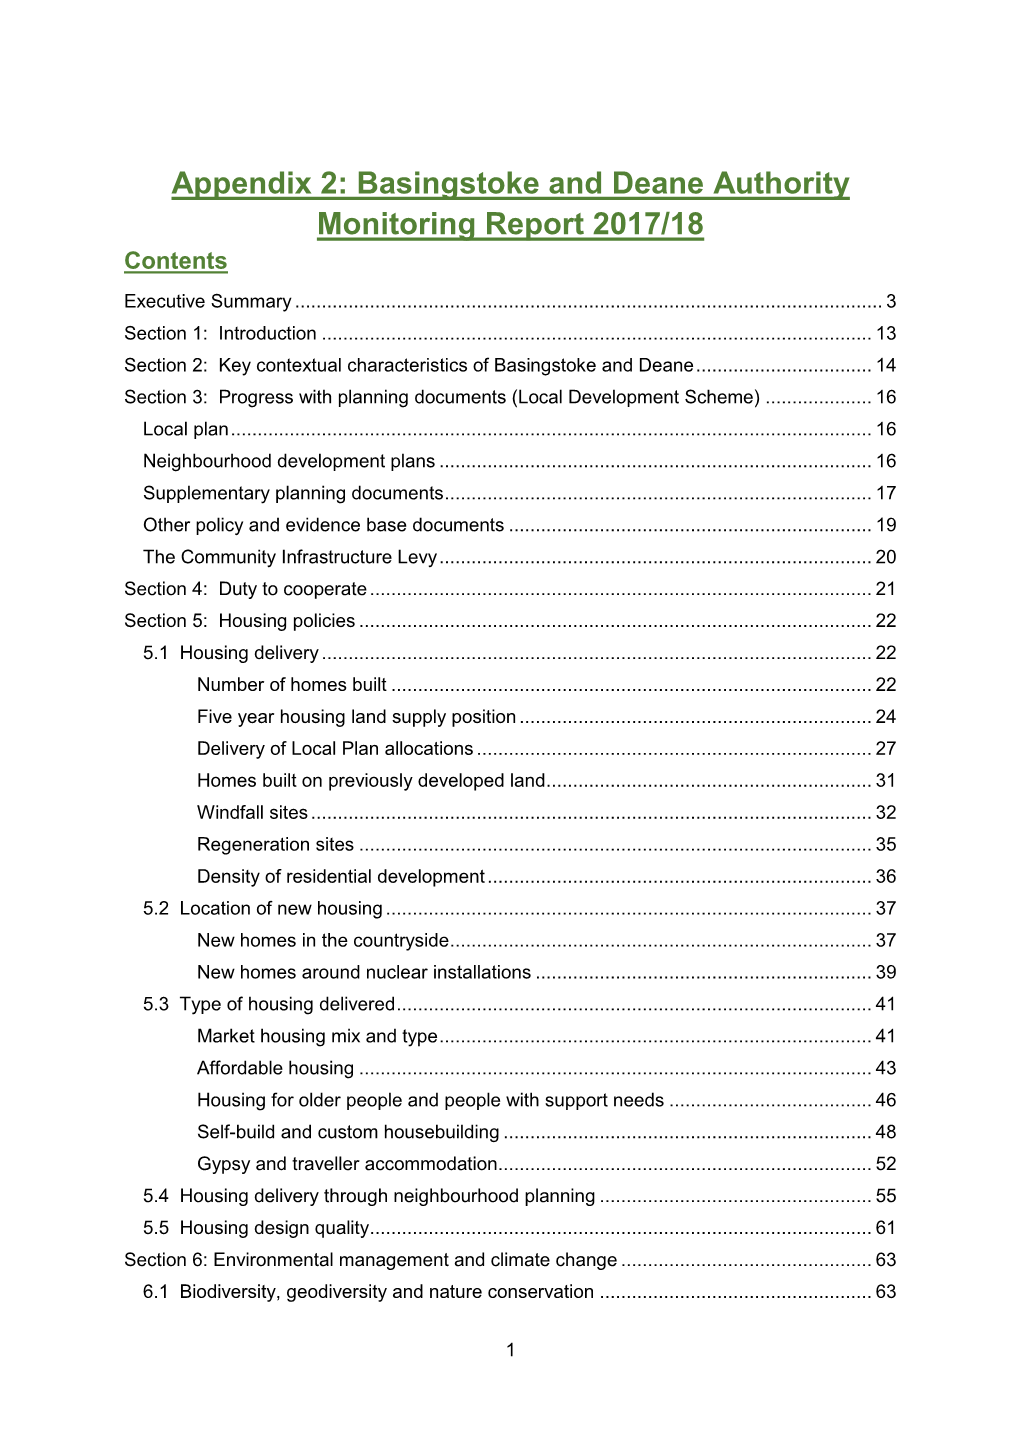 Appendix 2: Basingstoke and Deane Authority Monitoring Report 2017/18 Contents